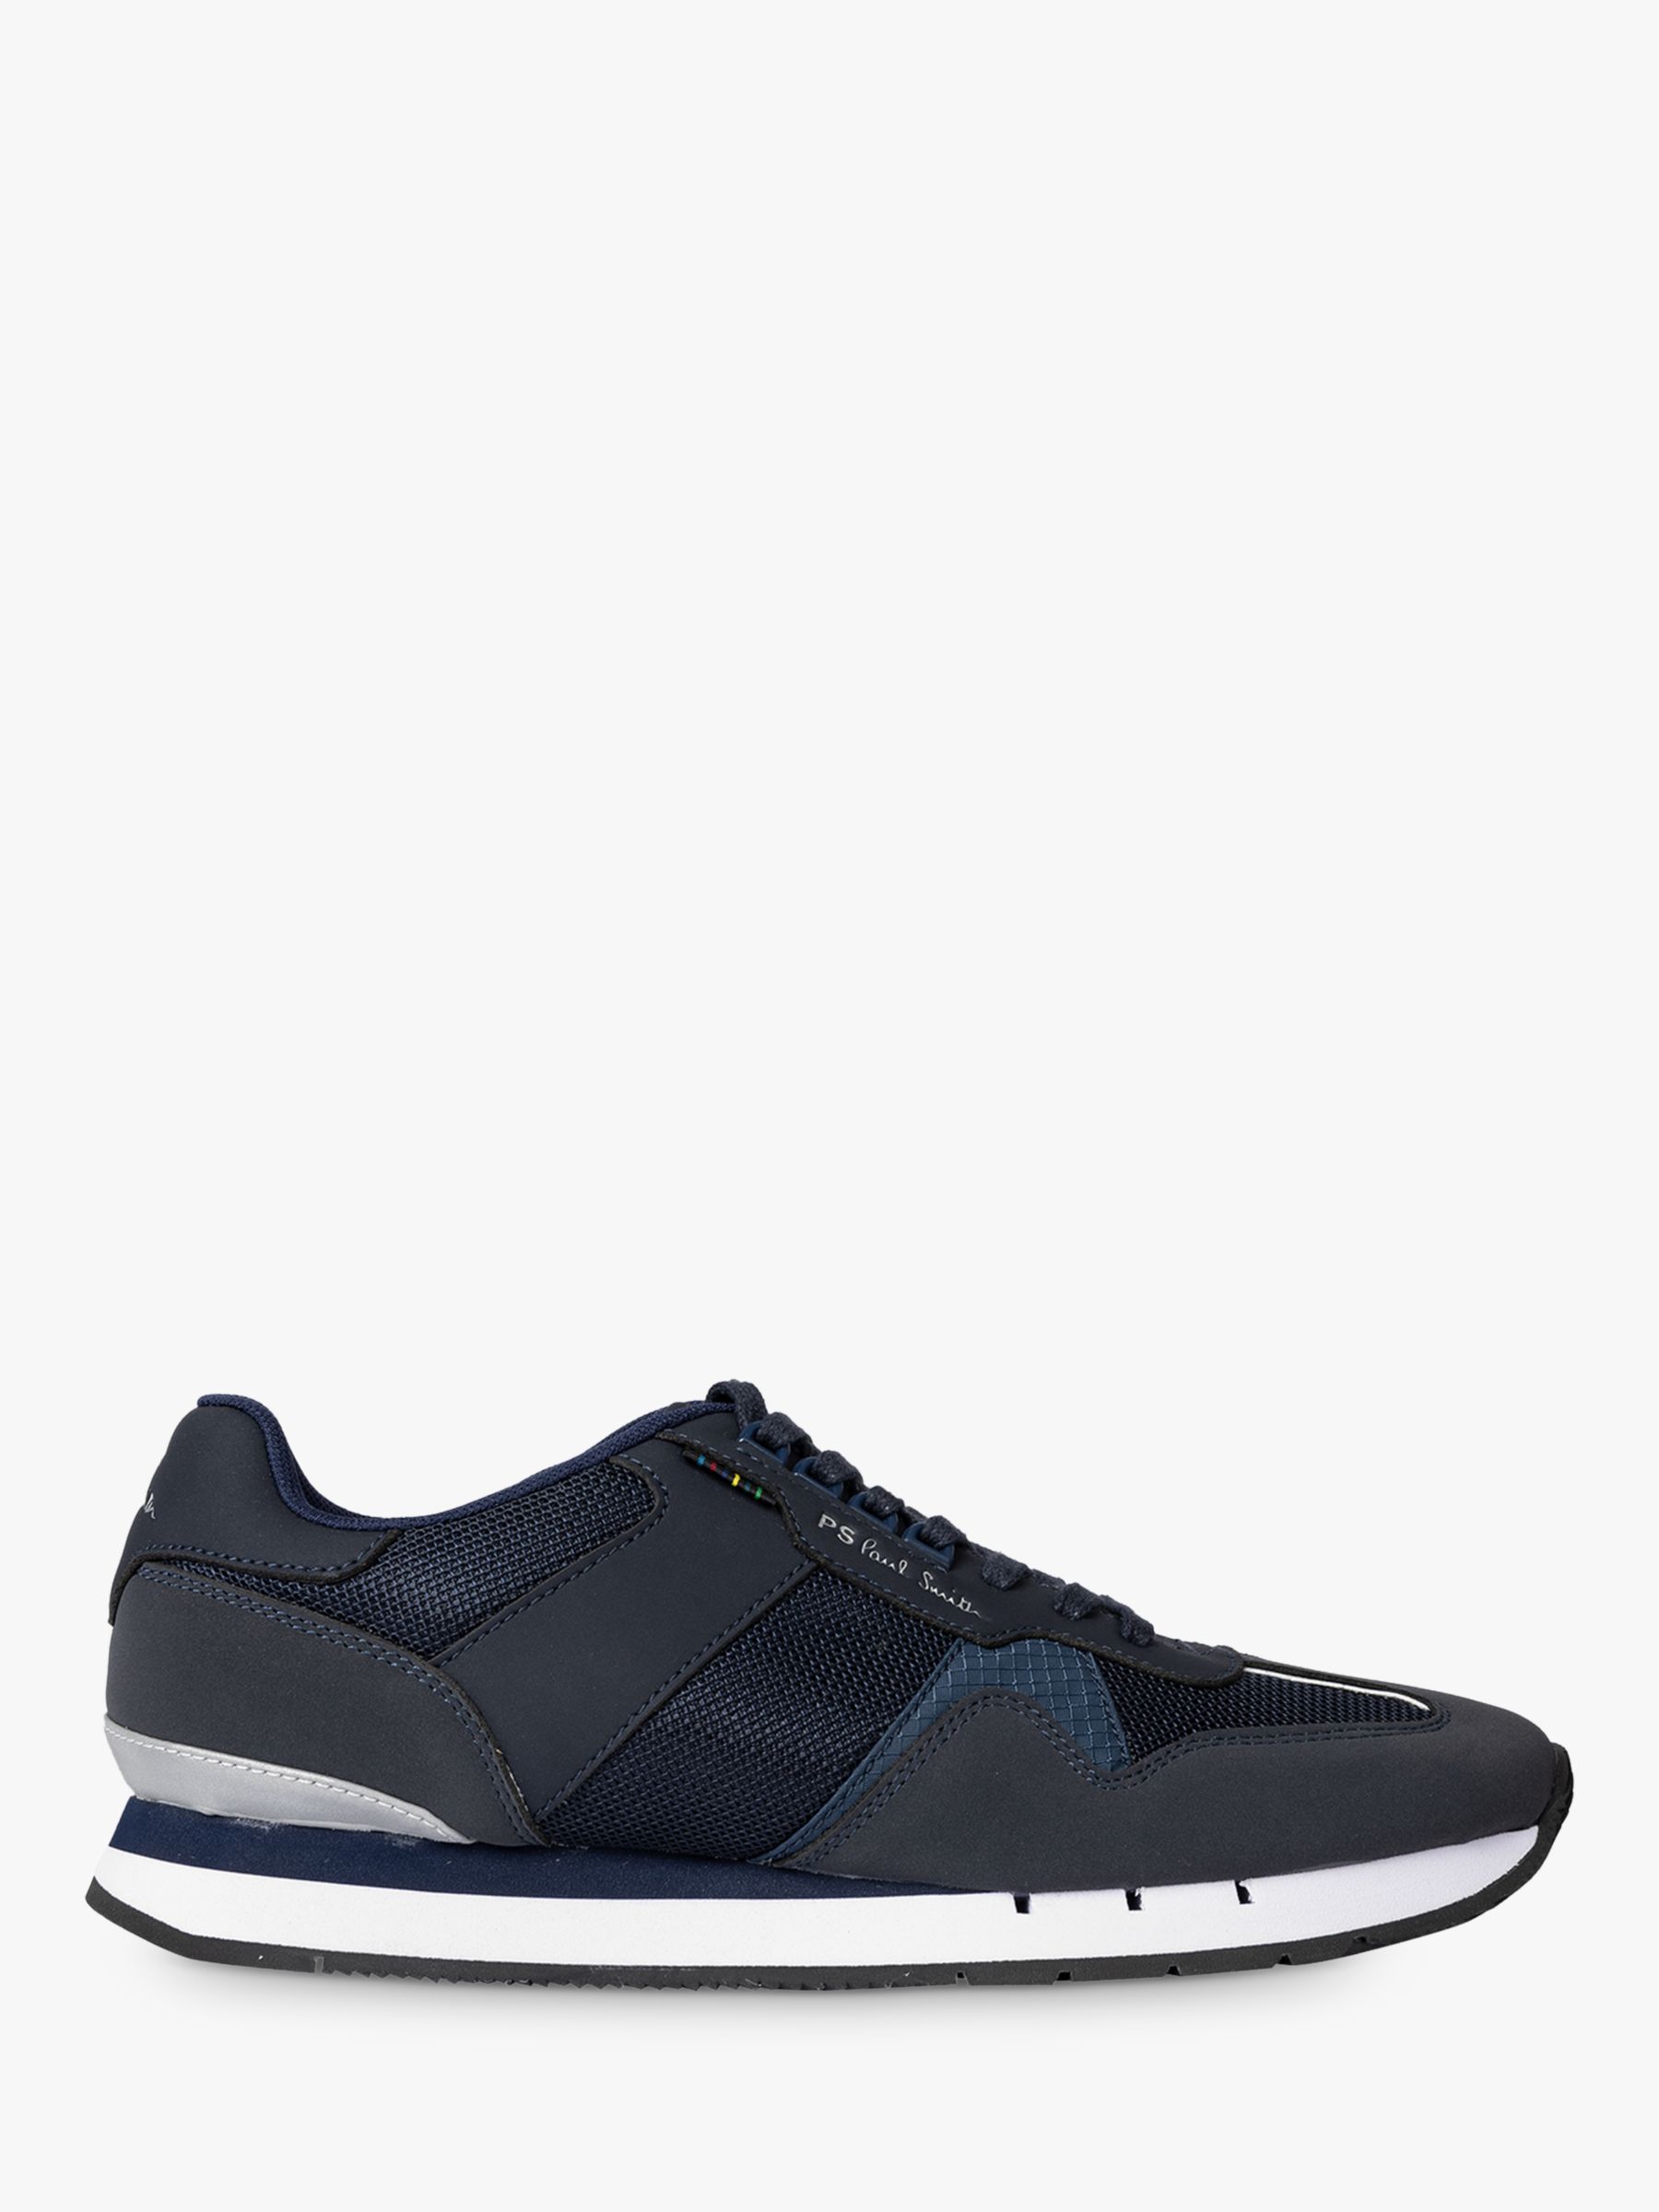 Paul Smith Brandon Trainers, Navy at John Lewis & Partners